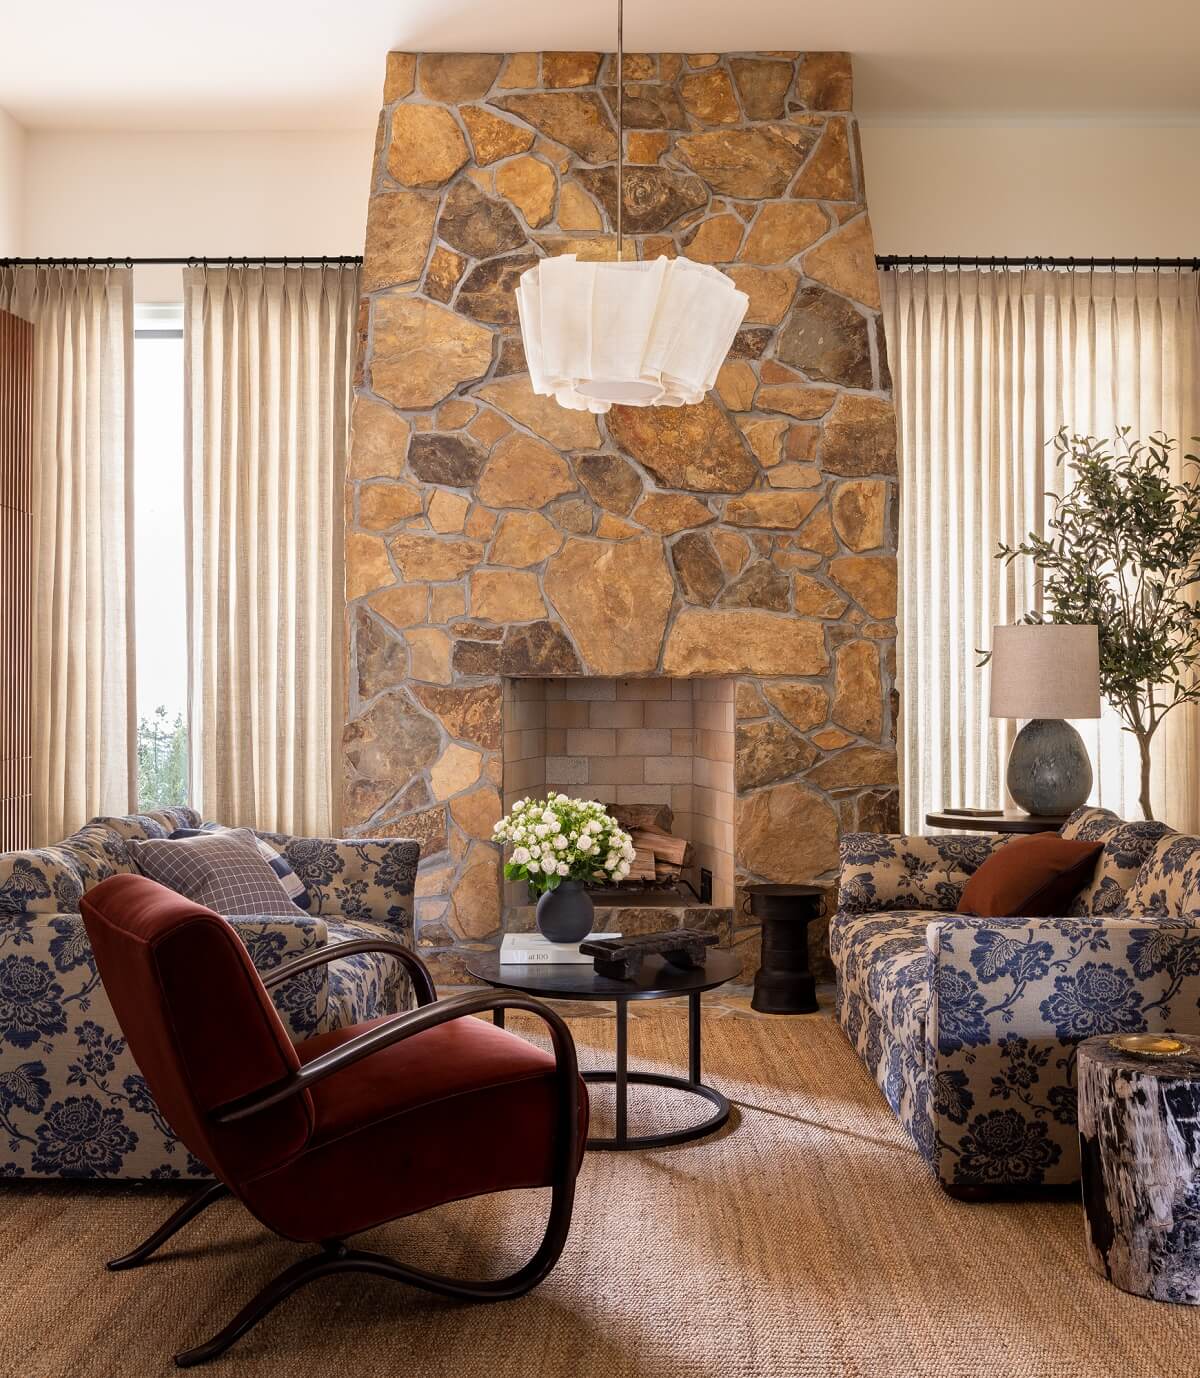 sitting-room-stone-fireplace-blue-patterned-sofas-red-armchair-nordroom